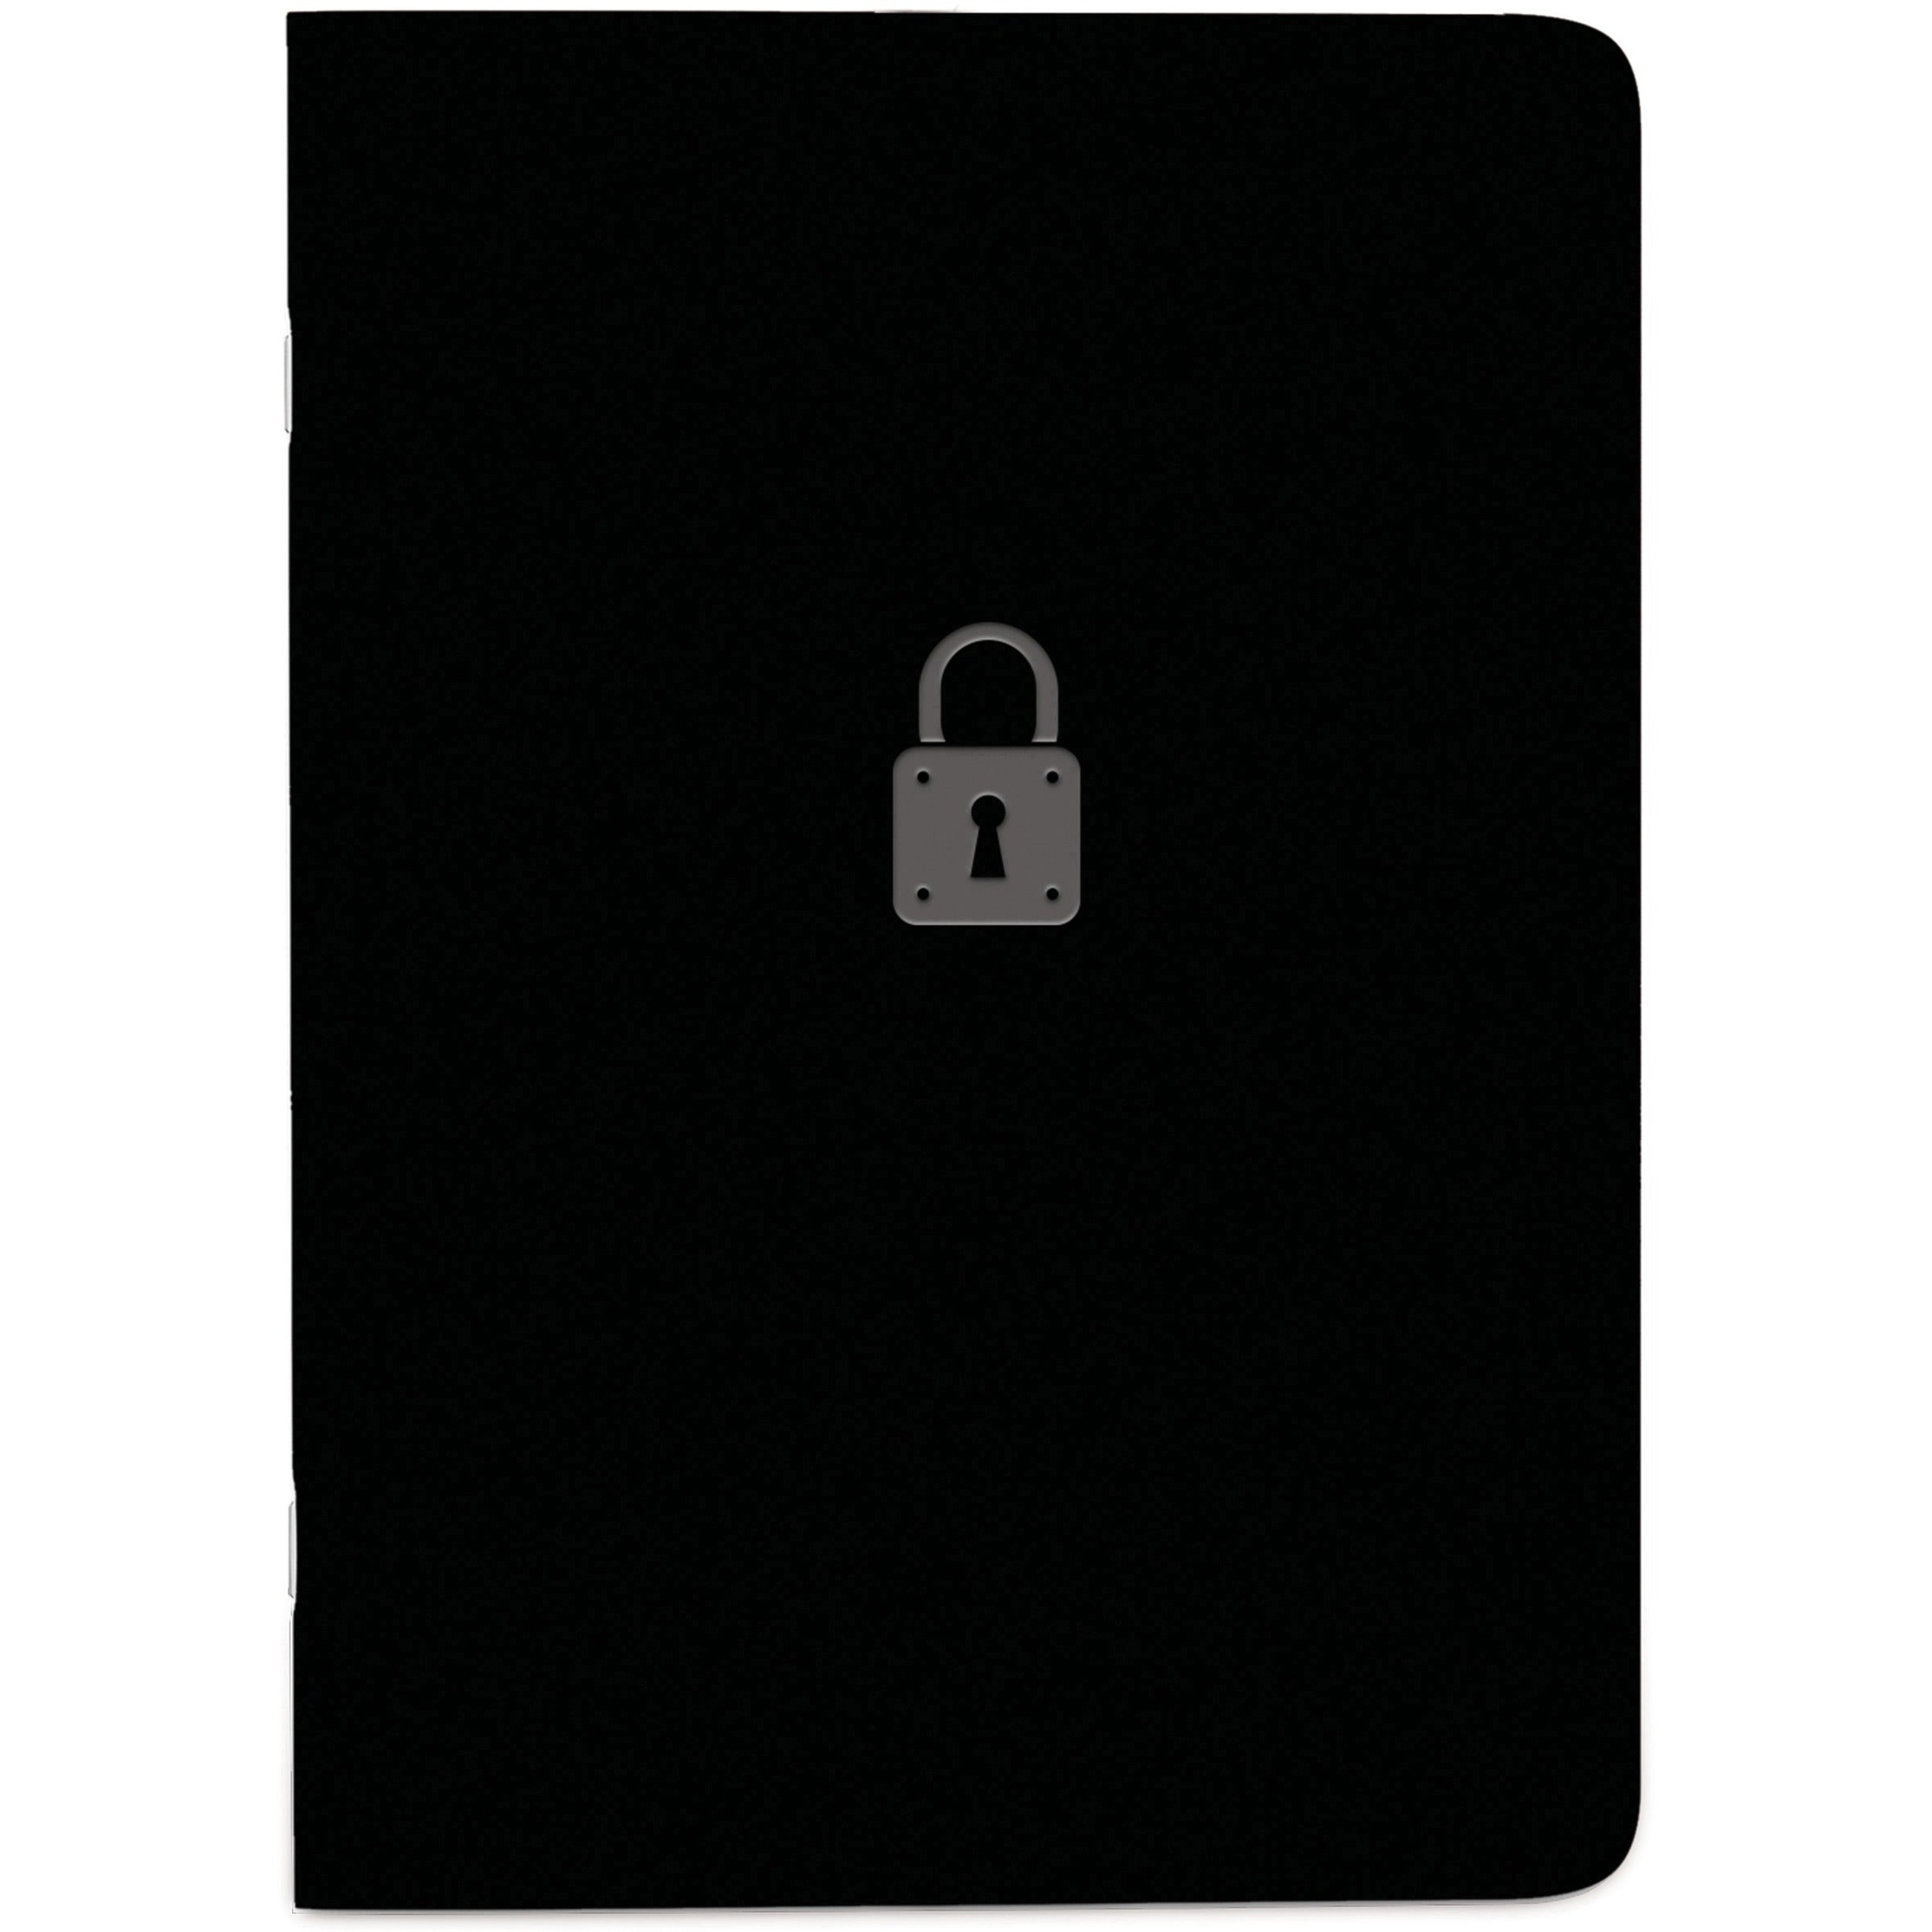 rediform-password-notebook-64-pages-sewn-040-x-35-x-5-black-cover-compact-flexible-cover-bilingual-format-note-section-recycled-1-each_reda00781 - 1